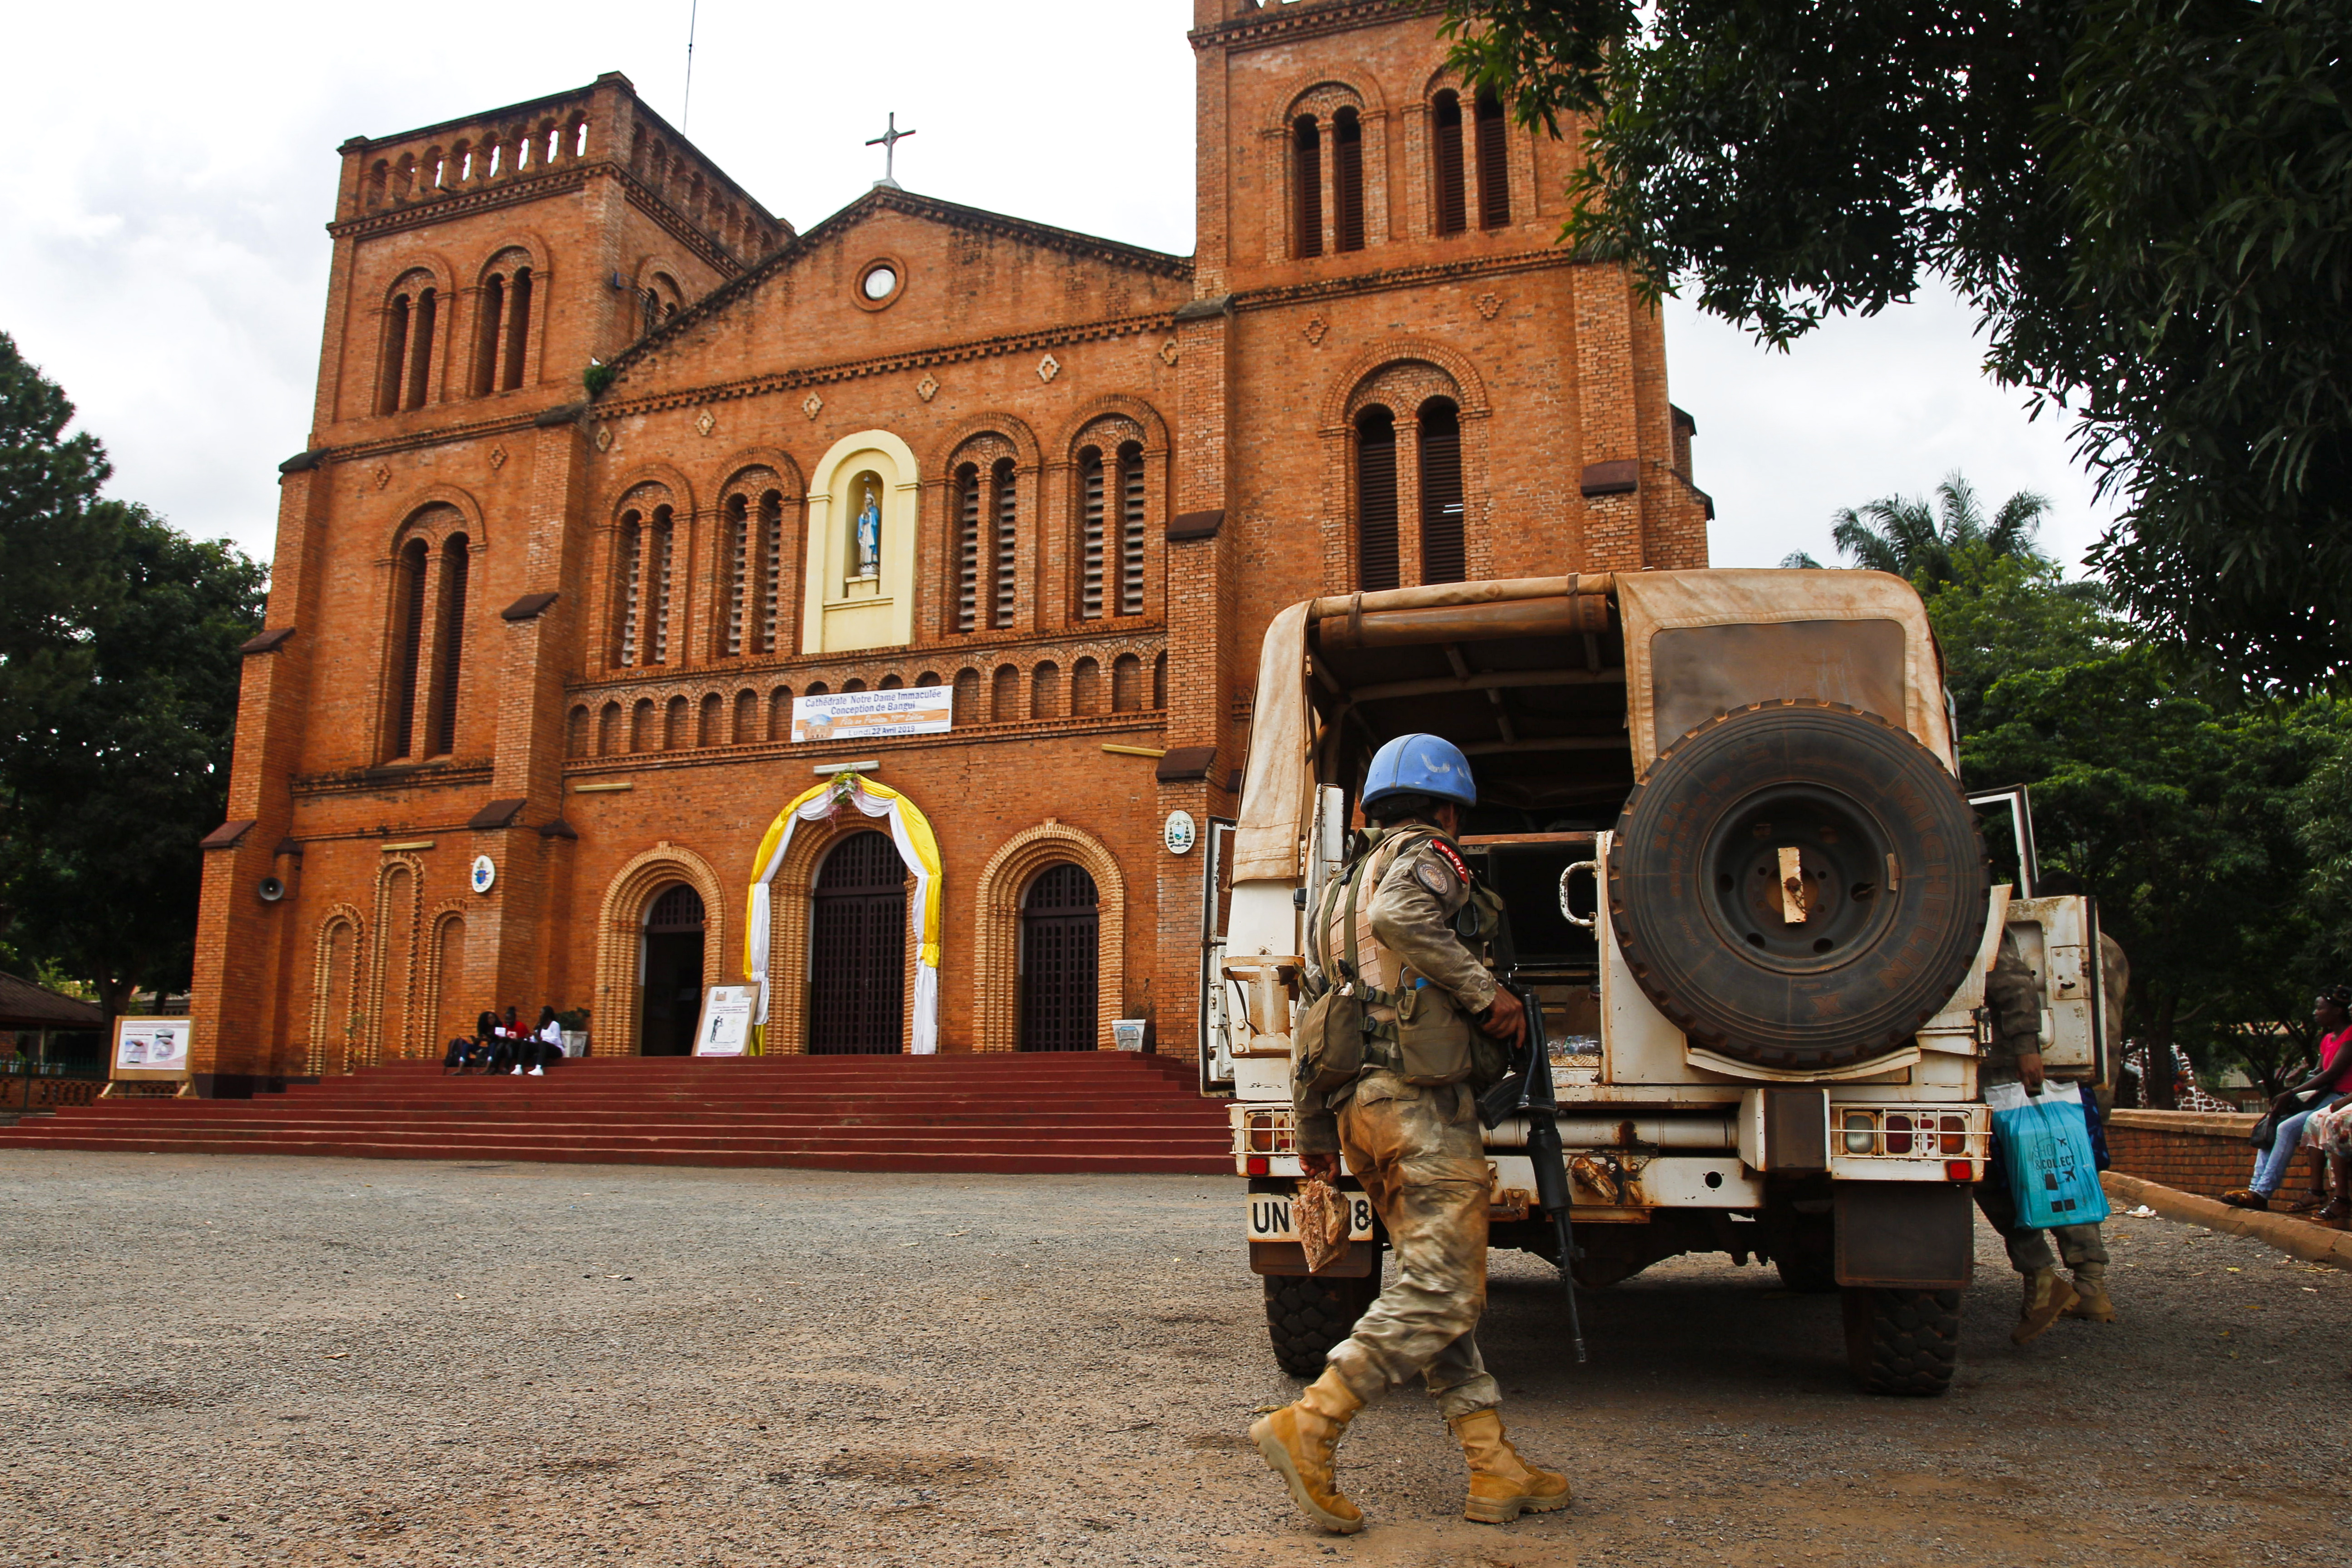  A UN peacekeeper loads a UN van outside the cathedral in Bangui, Central African Republic